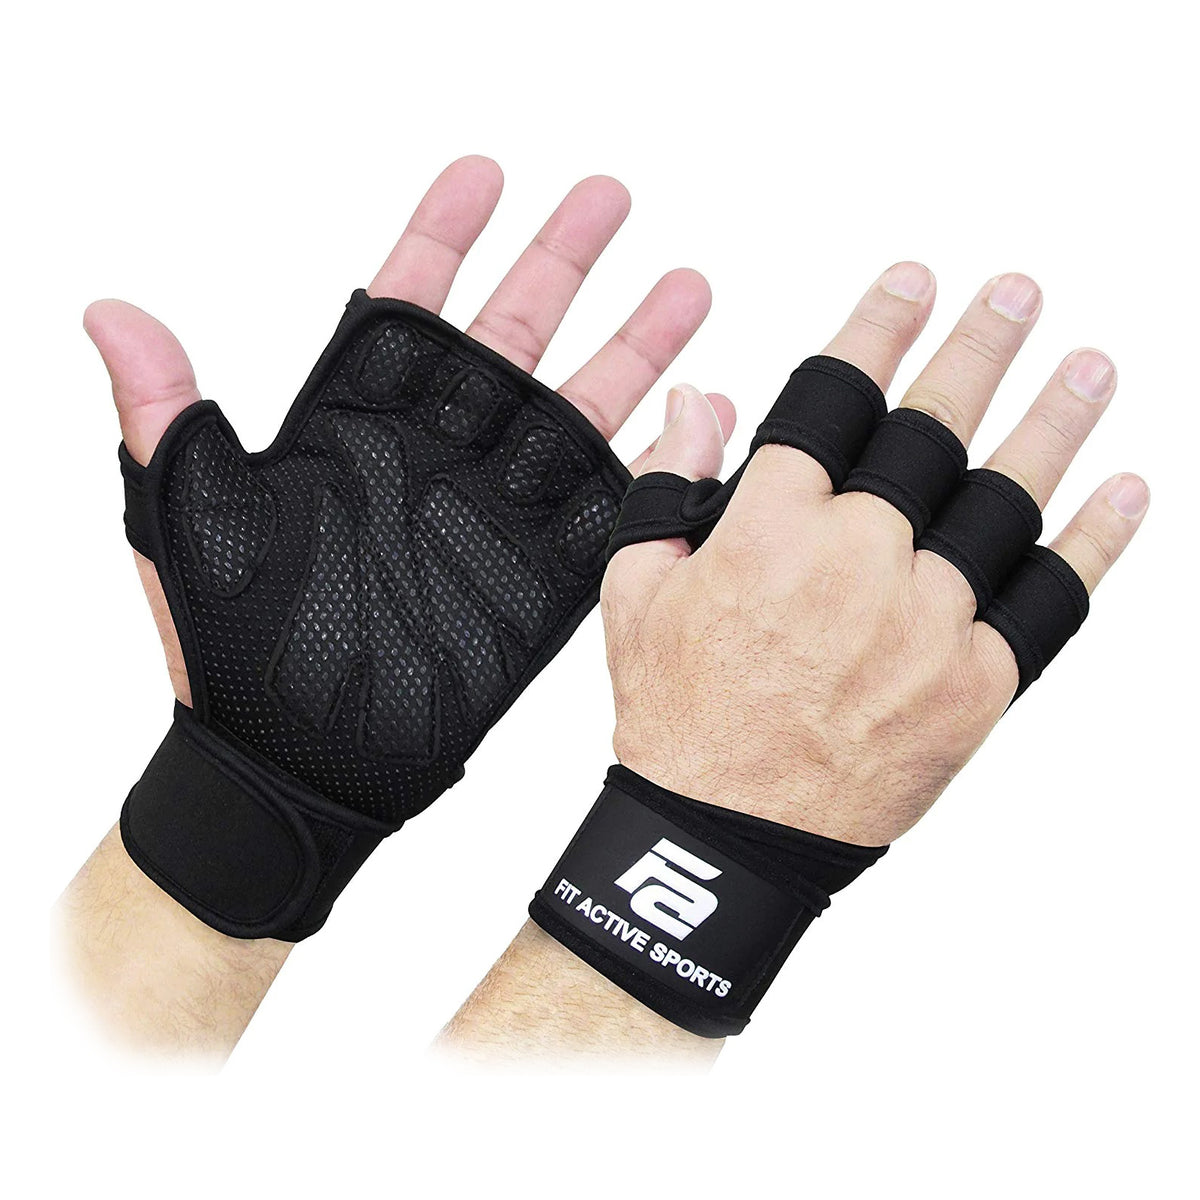 New Ventilated Weight Lifting Workout Gloves with Built-in Wrist Wraps for Men and Women - Great for Gym Fitness